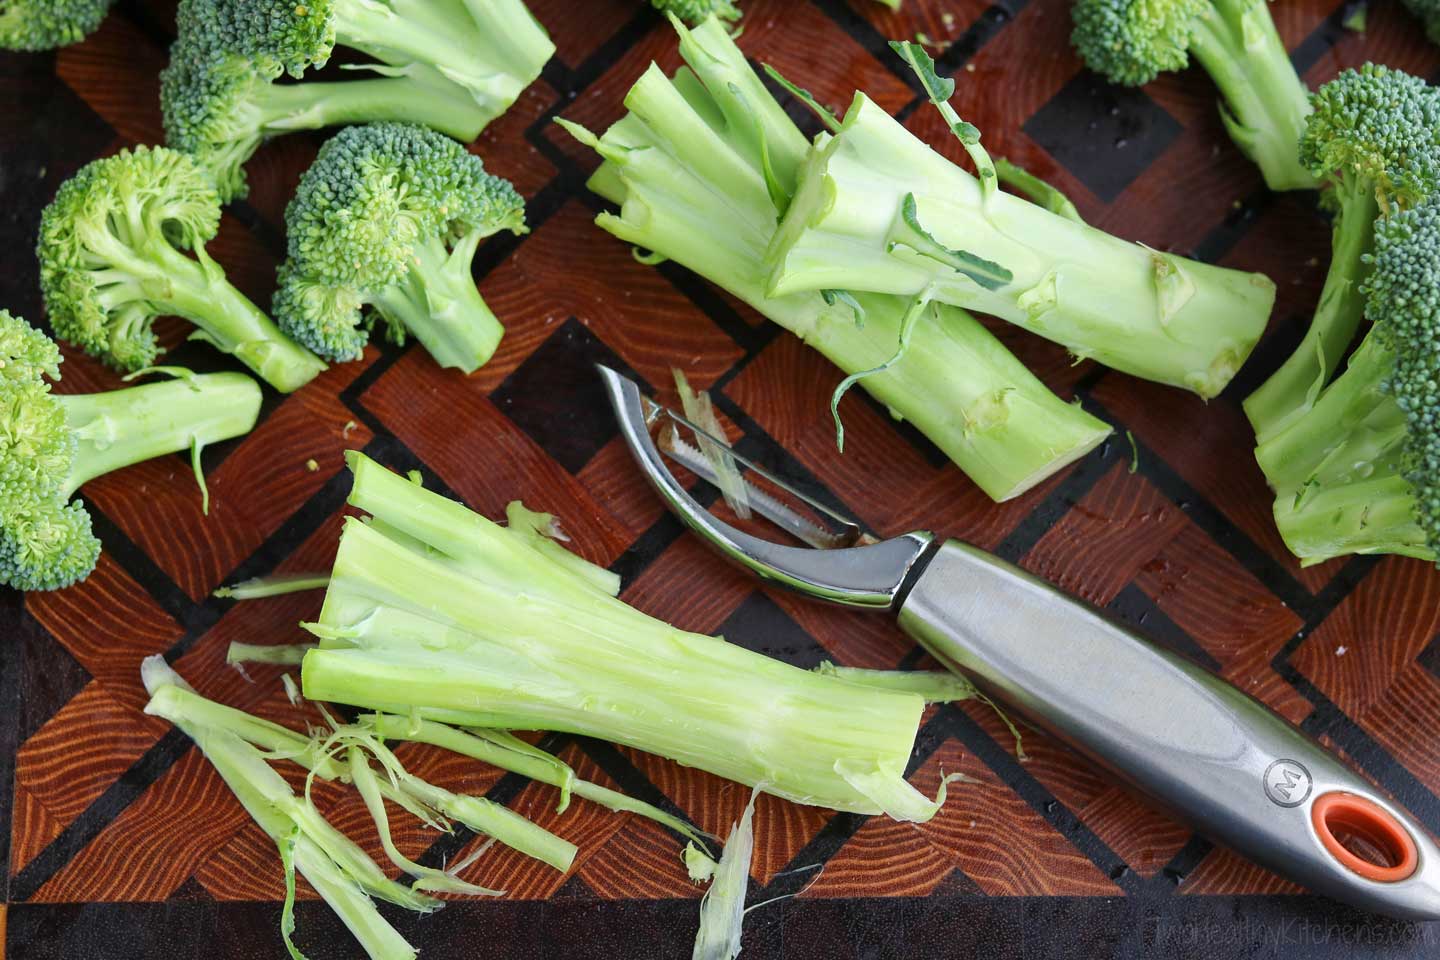 Peeling broccoli stalks helps to remove some of the tough outer layer. The stems of broccoli are tender near the florets and may not even need to be peeled at all, but it’s helpful to remove the tough outer layer further down near the base of each broccoli stalk.